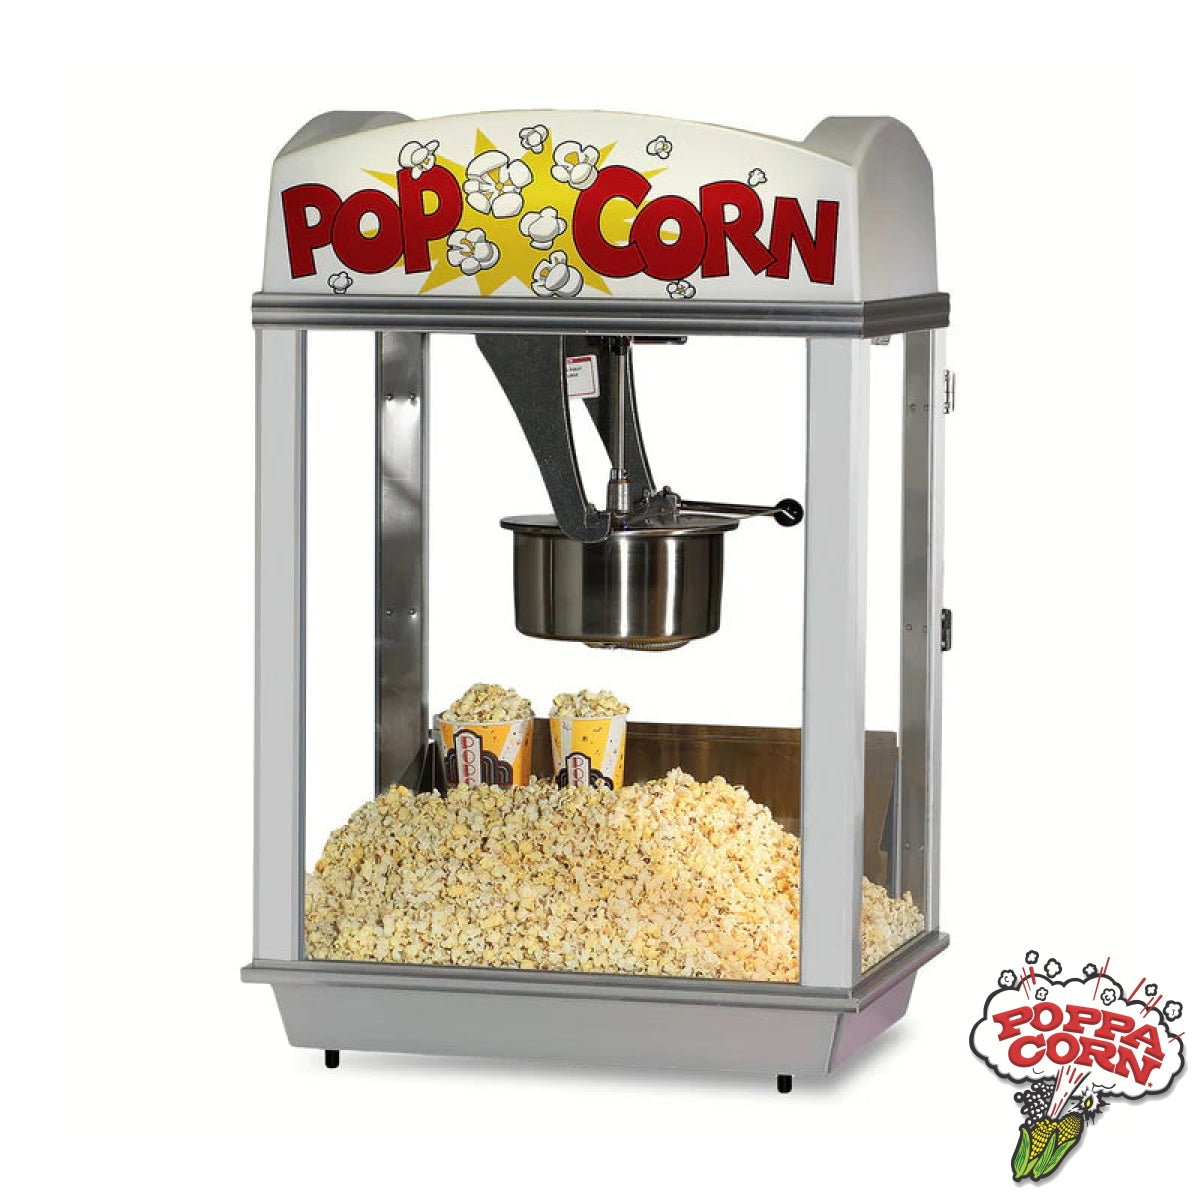 Whiz Bang Popcorn Machine - Stainless Steel, Lighted Sign and Forced-Air Popcorn Crisping System - GM2005ST - Poppa Corn Corp